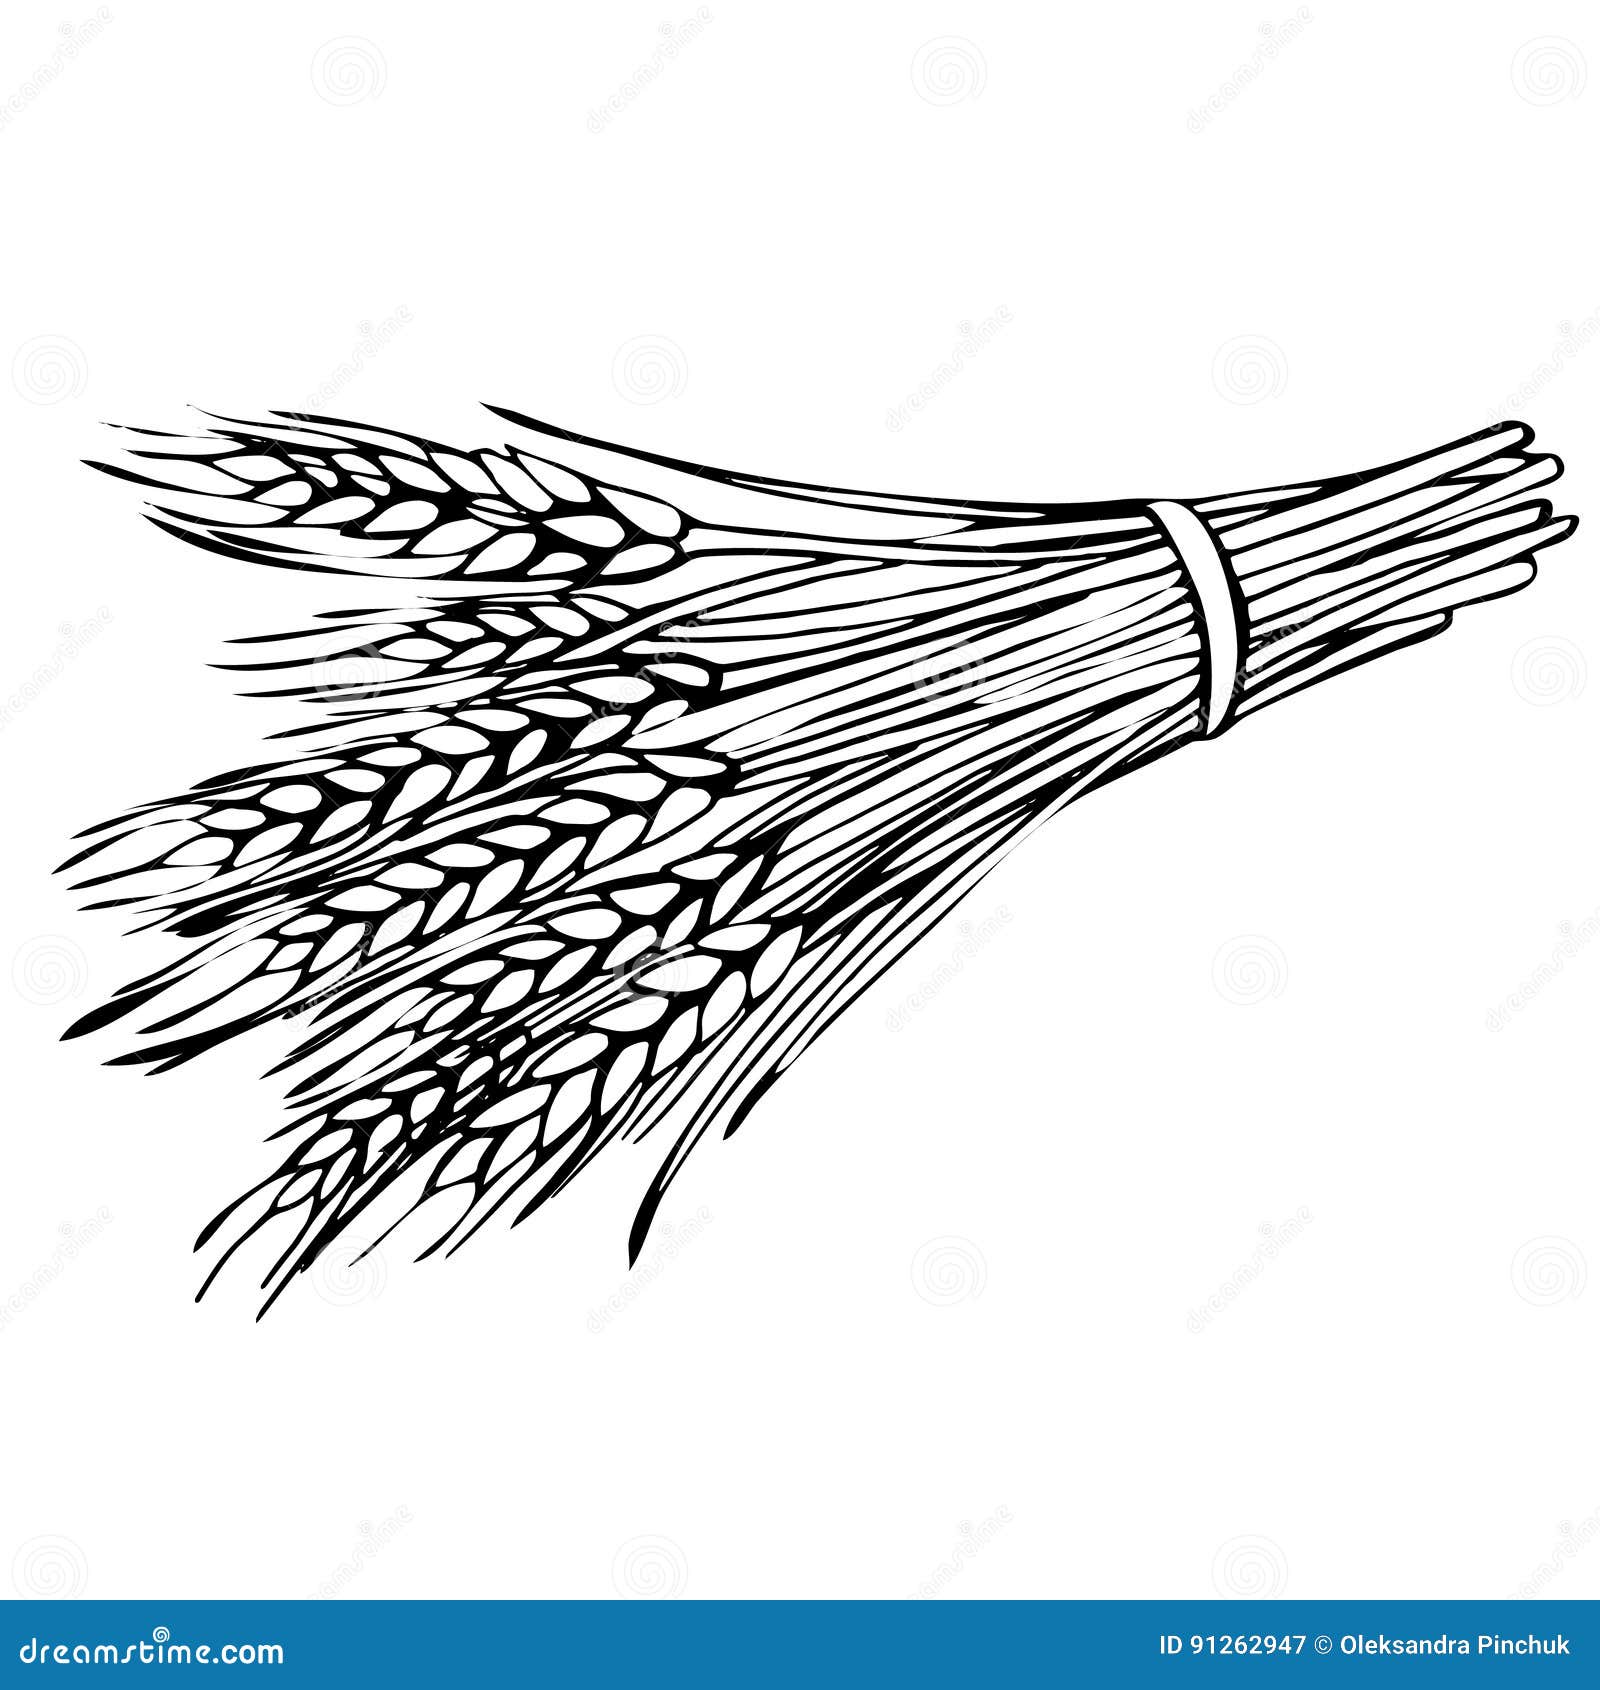 Sketch Sheaf Of Wheat Stock Vector Illustration Of Healthy